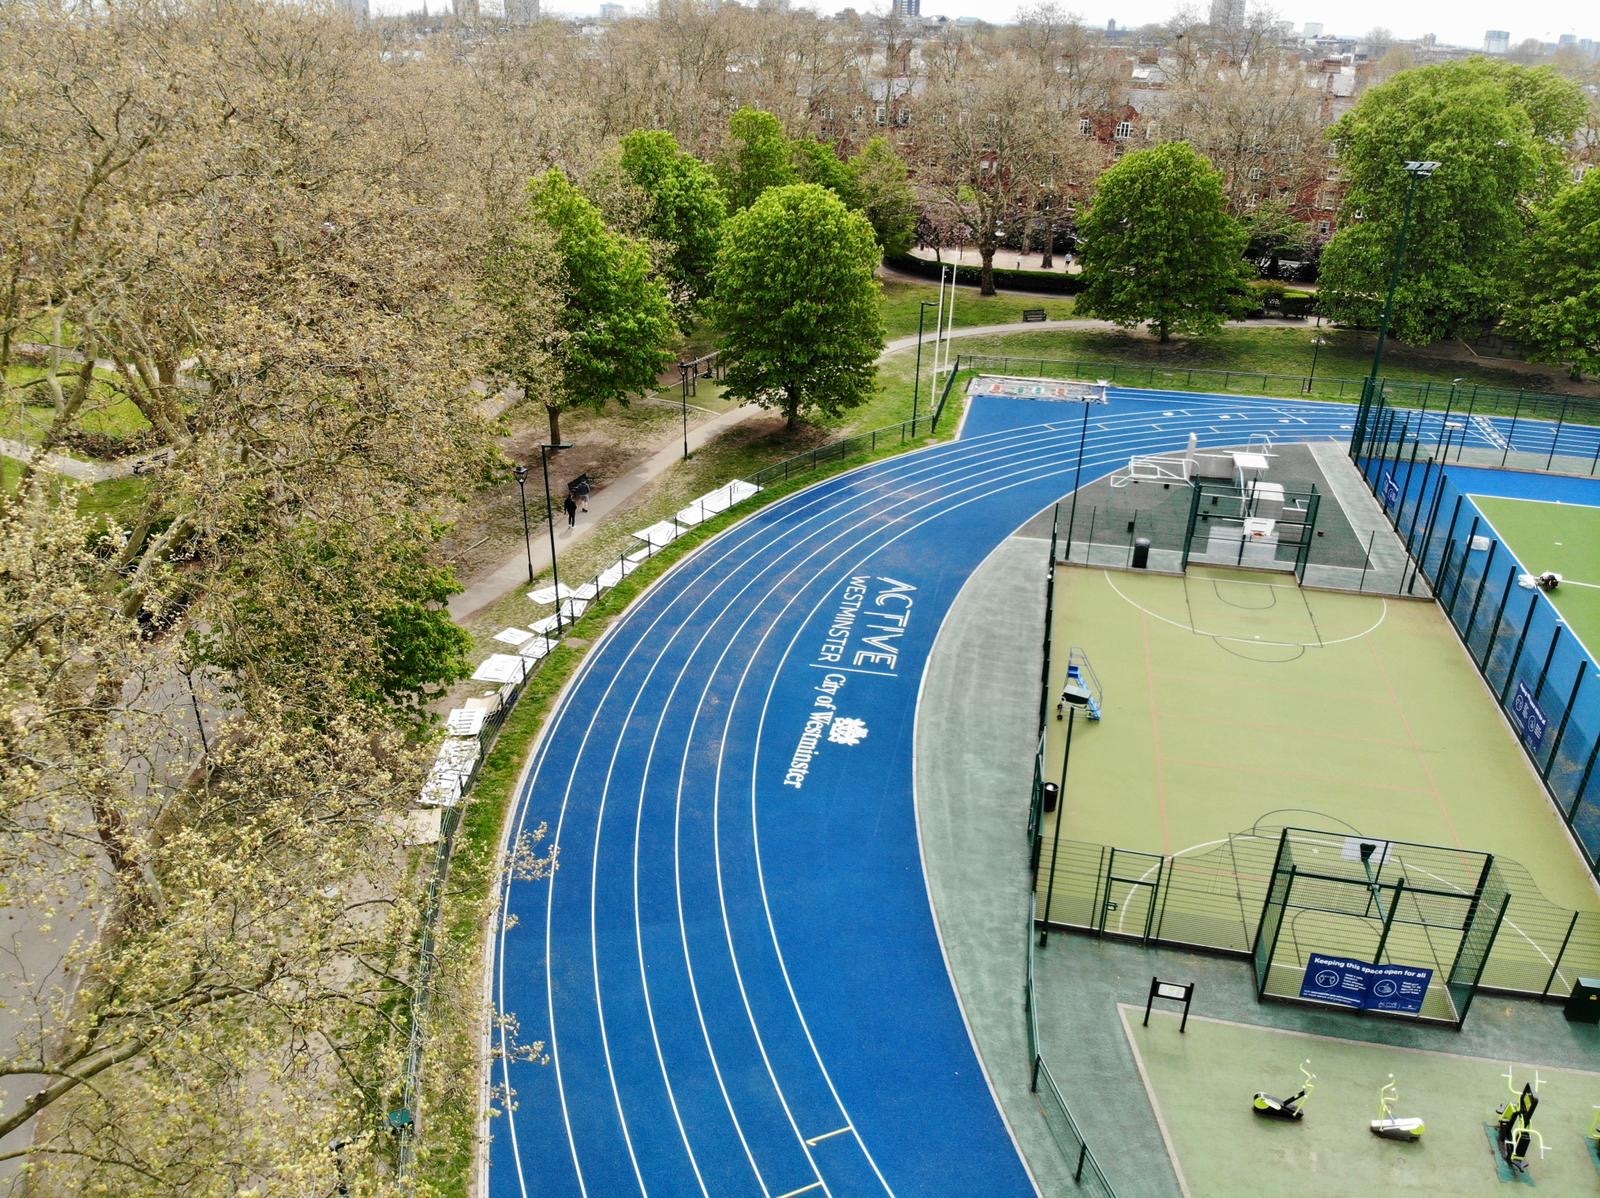 The athletics track surface was project managed by Everyone Ective, with ETC Sports Surfaces Ltd as the main contractor.